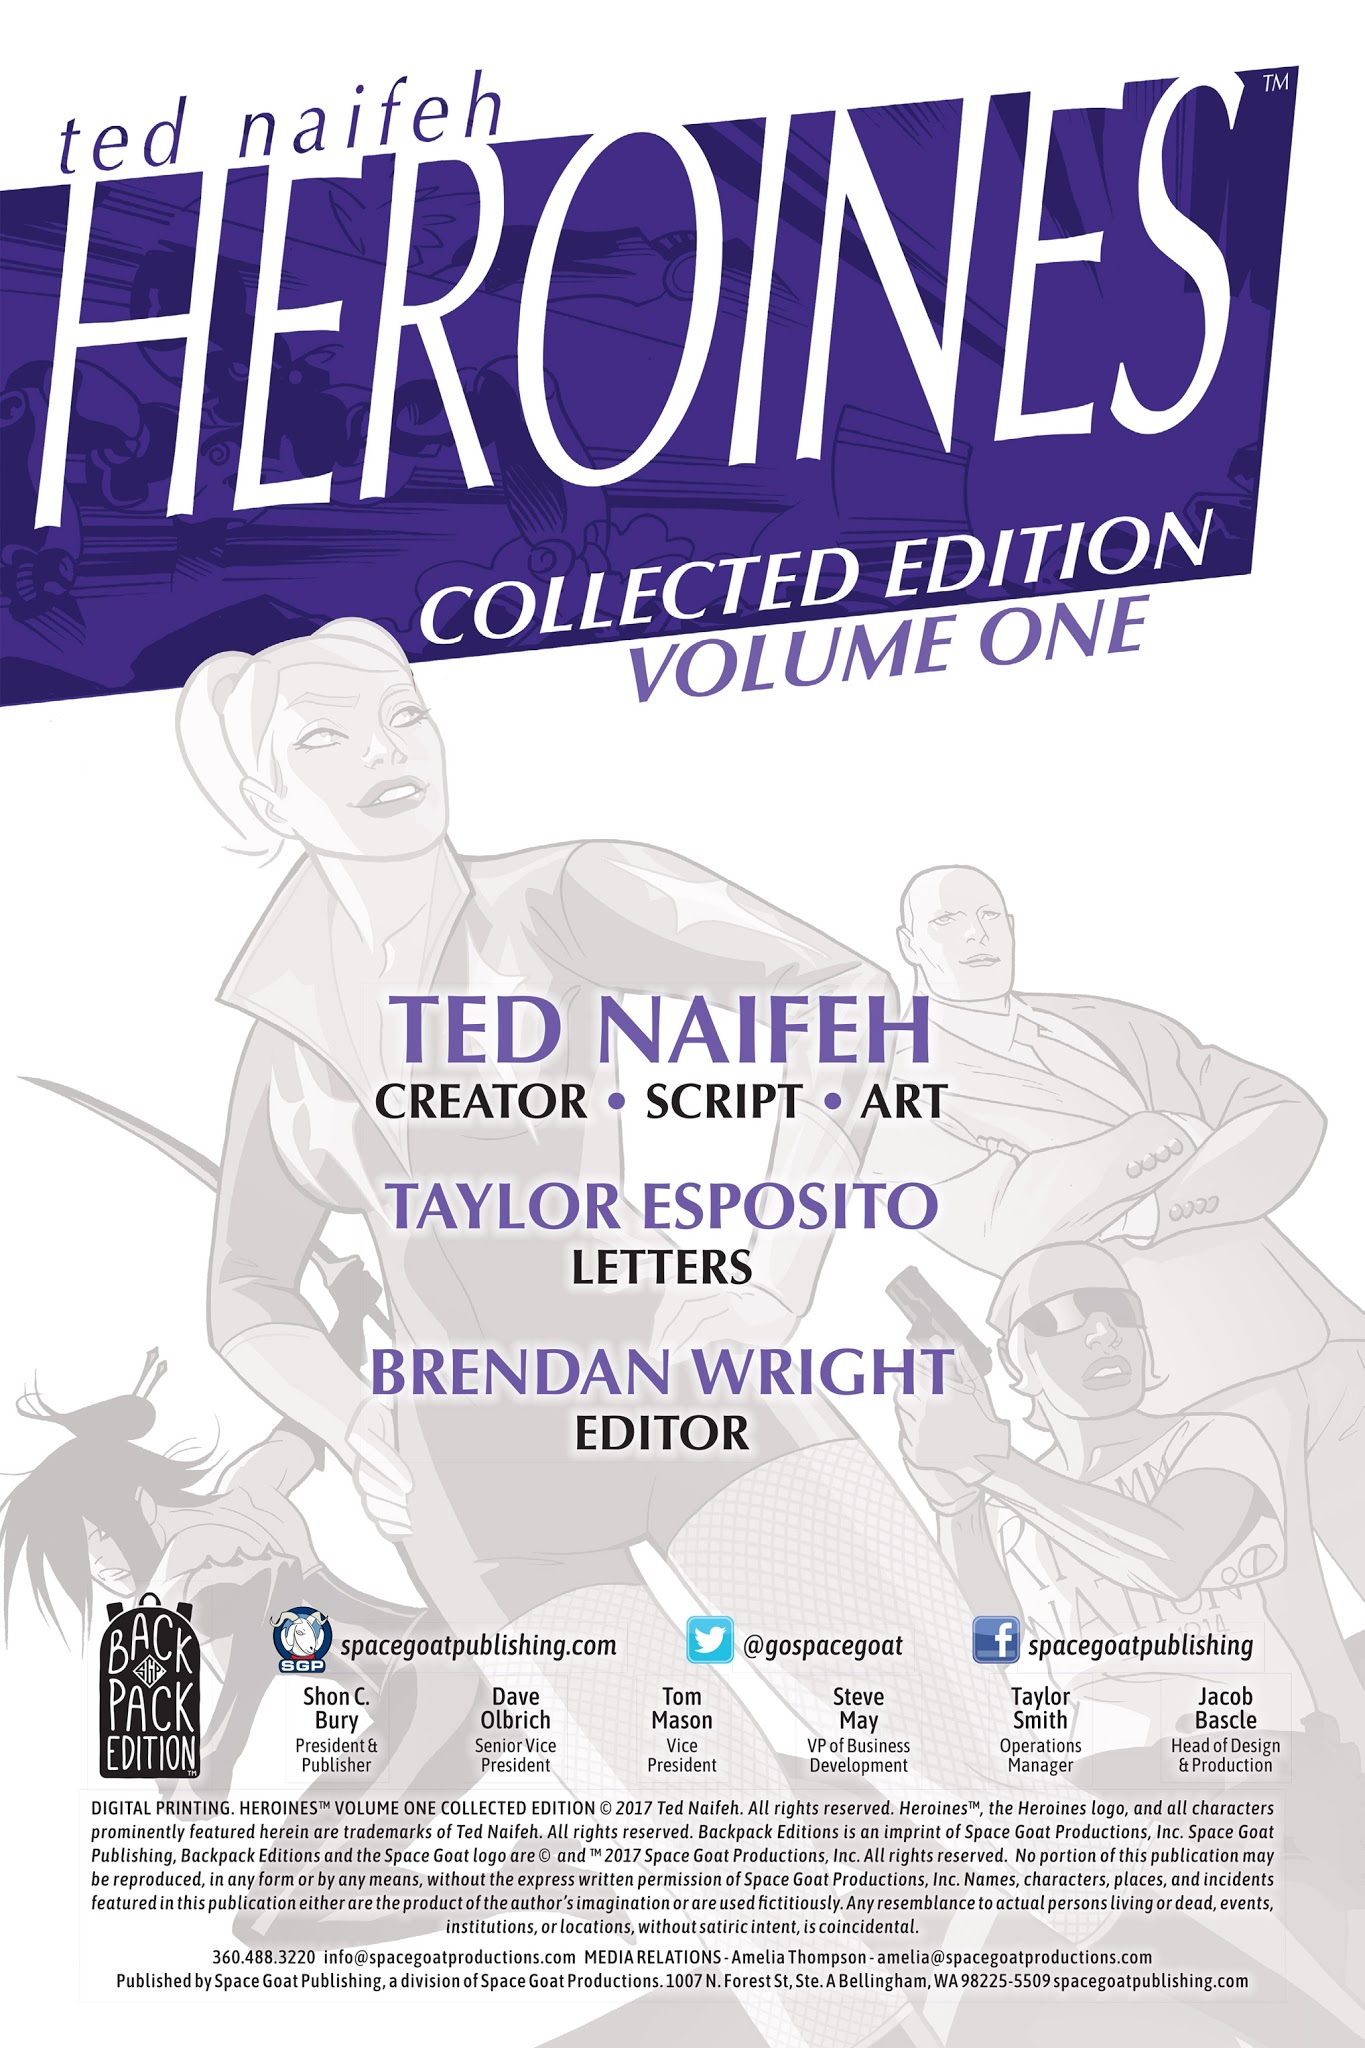 Read online Heroines comic -  Issue # TPB - 2